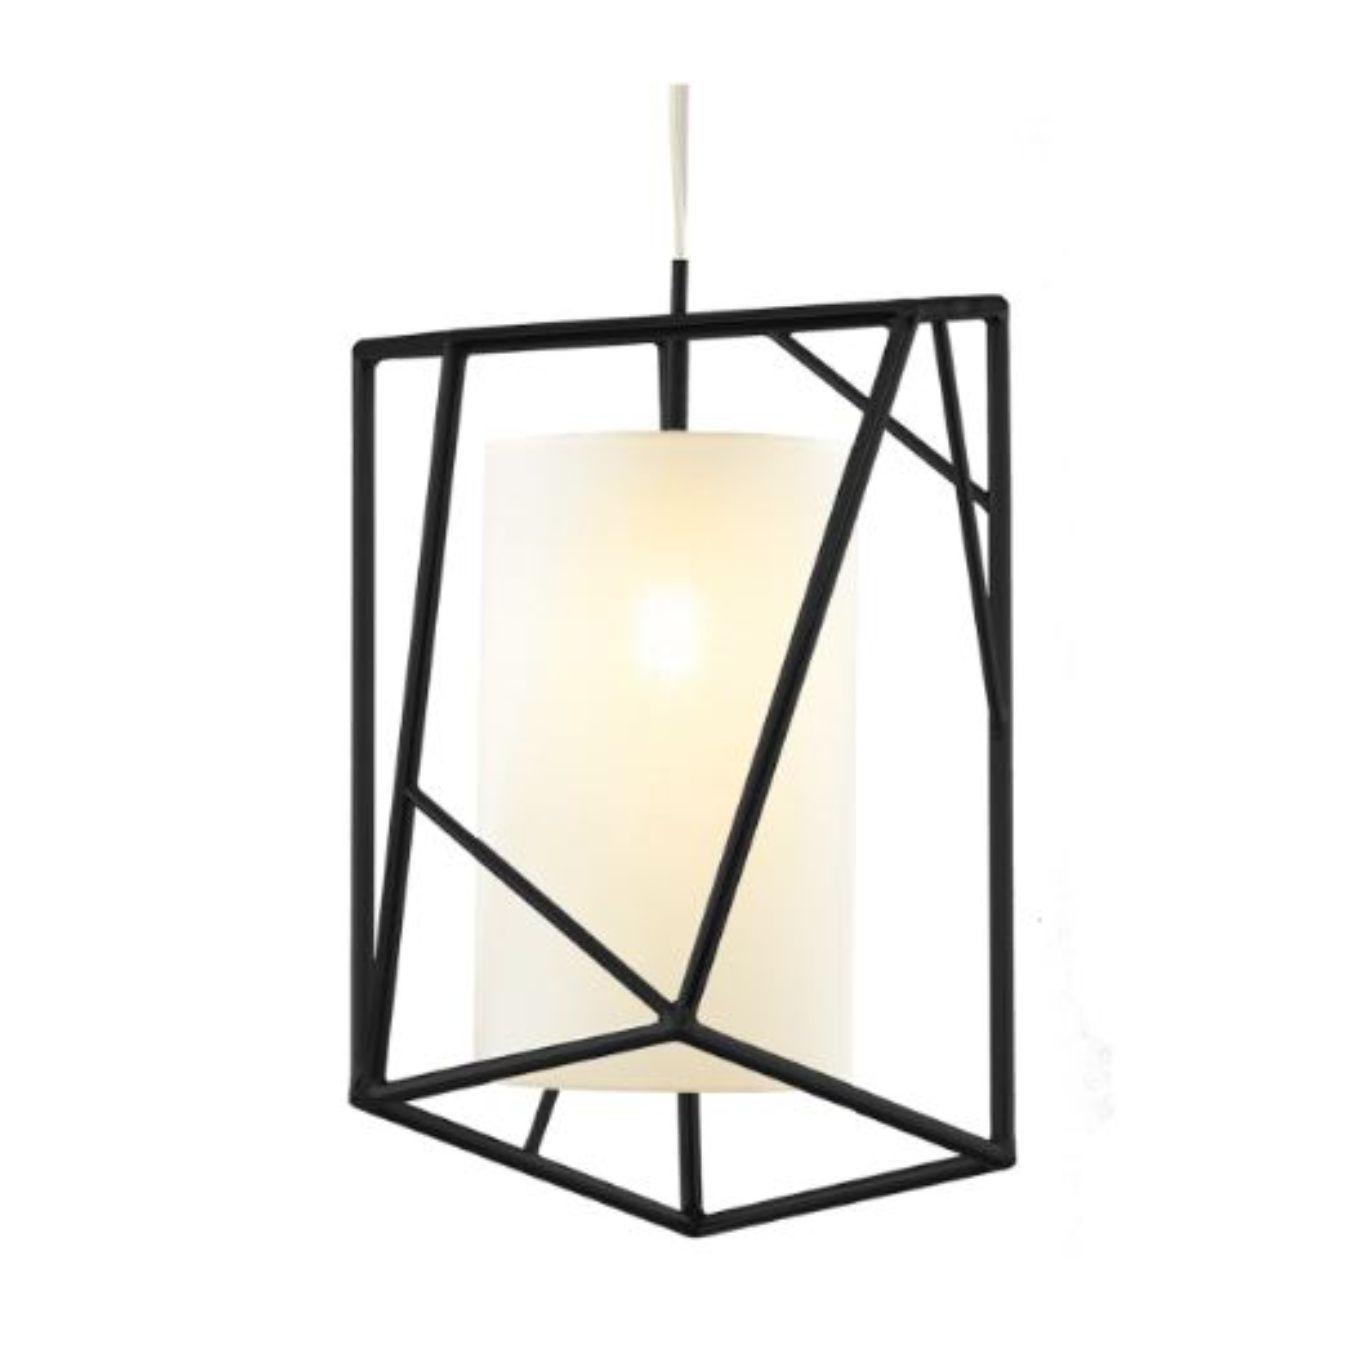 Black Star III suspension lamp by Dooq.
Dimensions: W 35 x D 35 x H 53 cm
Materials: lacquered metal, polished or satin metal.
Abat-jour: linen
Also available in different colors and materials.

Information:
230V/50Hz
E27/1x15W